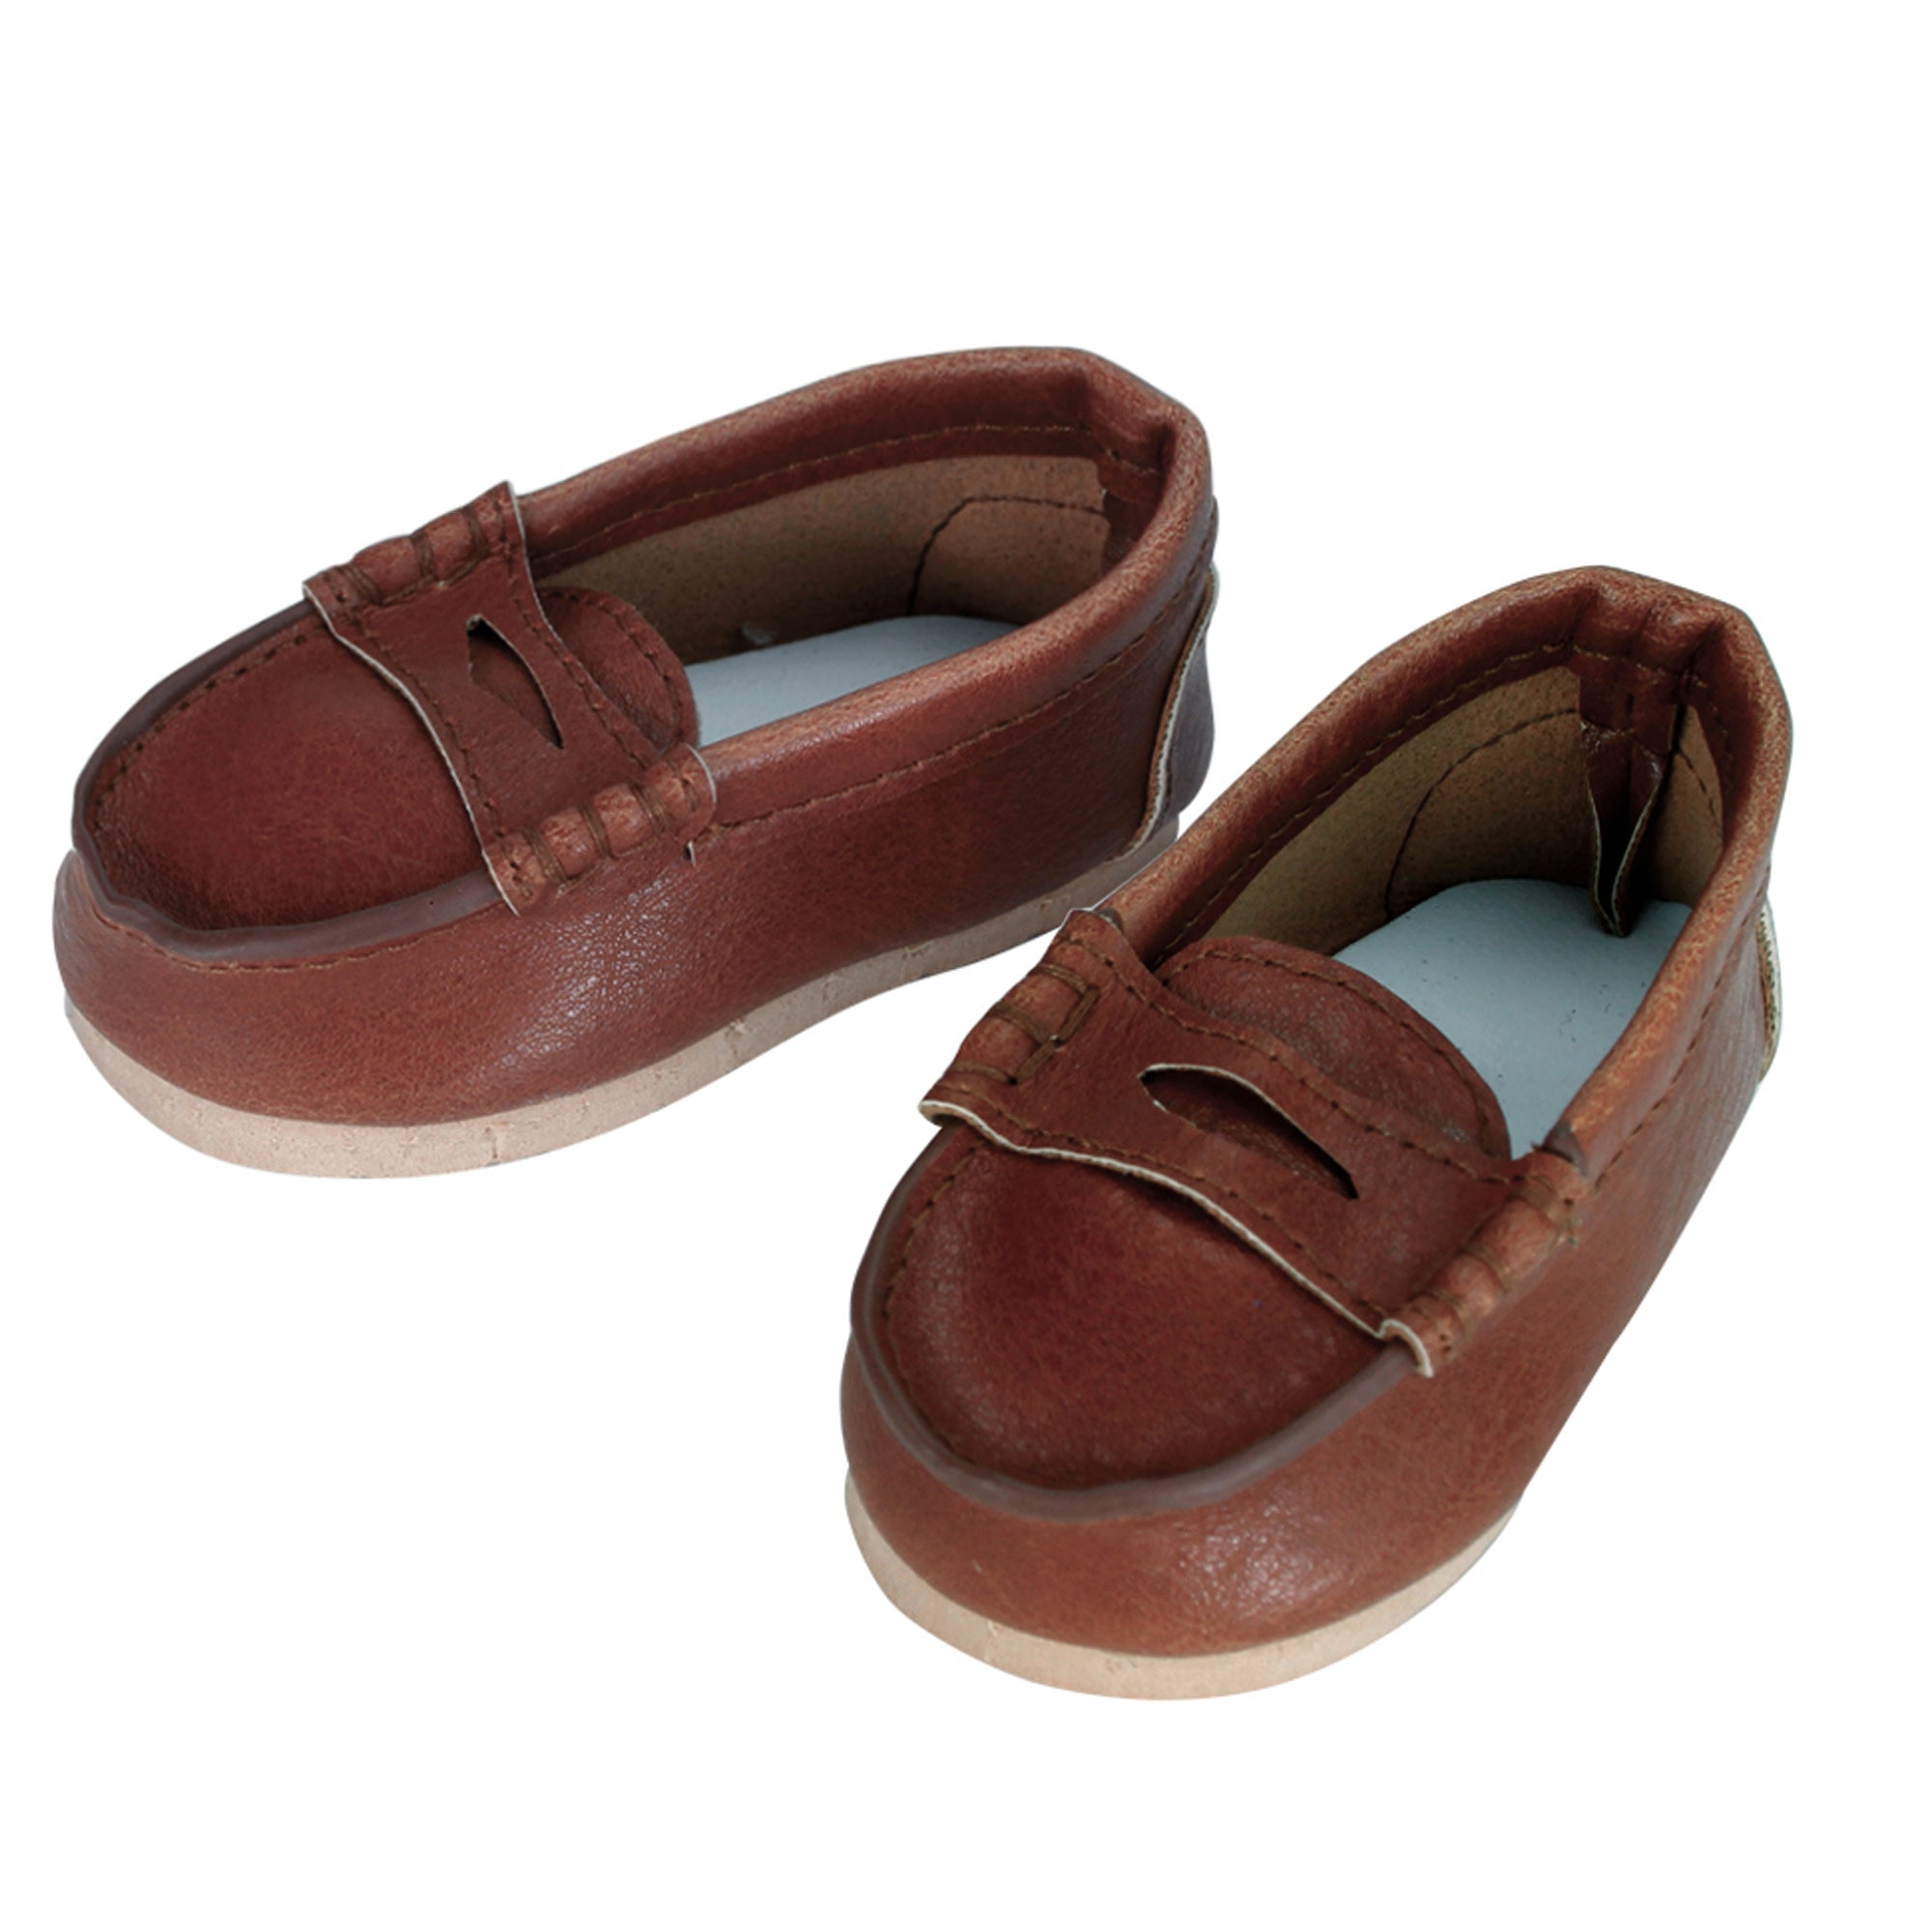 Sophia’s Classic Mix & Match Gender-Neutral Solid-Colored Cognac Faux Leather Slip-On Penny Loafers for 18” Dolls, Brown